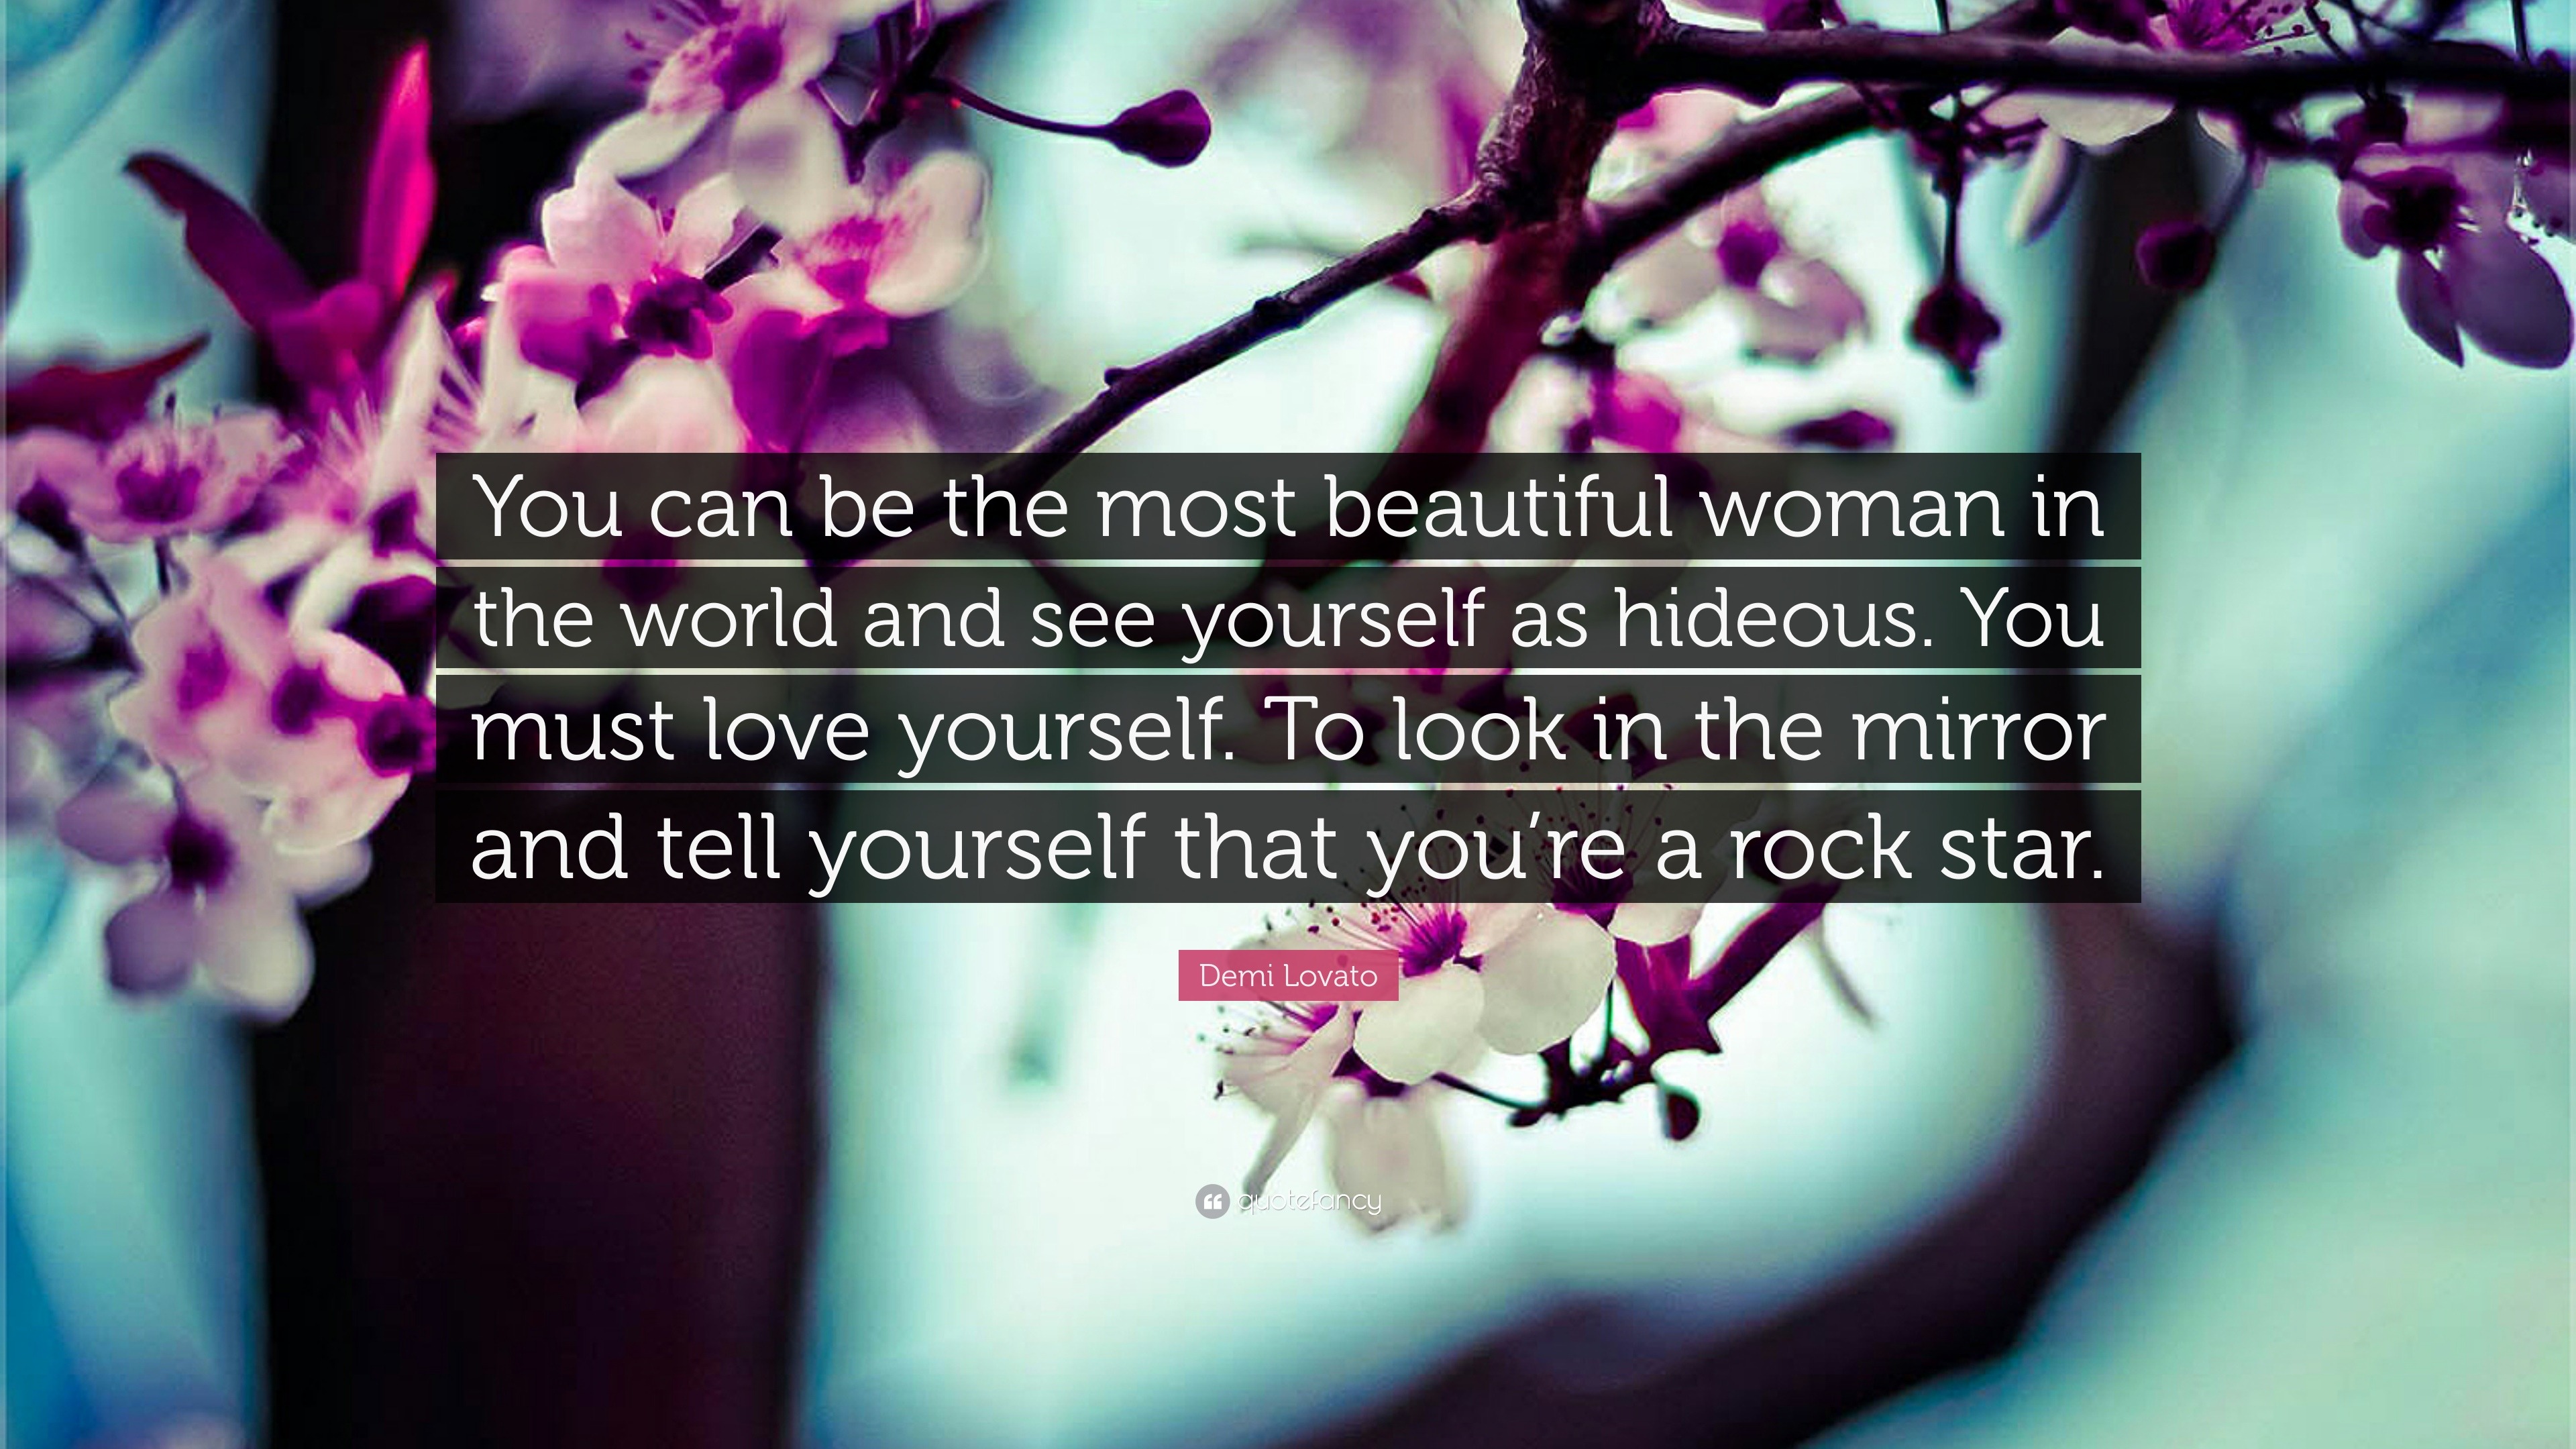 Demi Lovato Quote “You can be the most beautiful woman in the world and